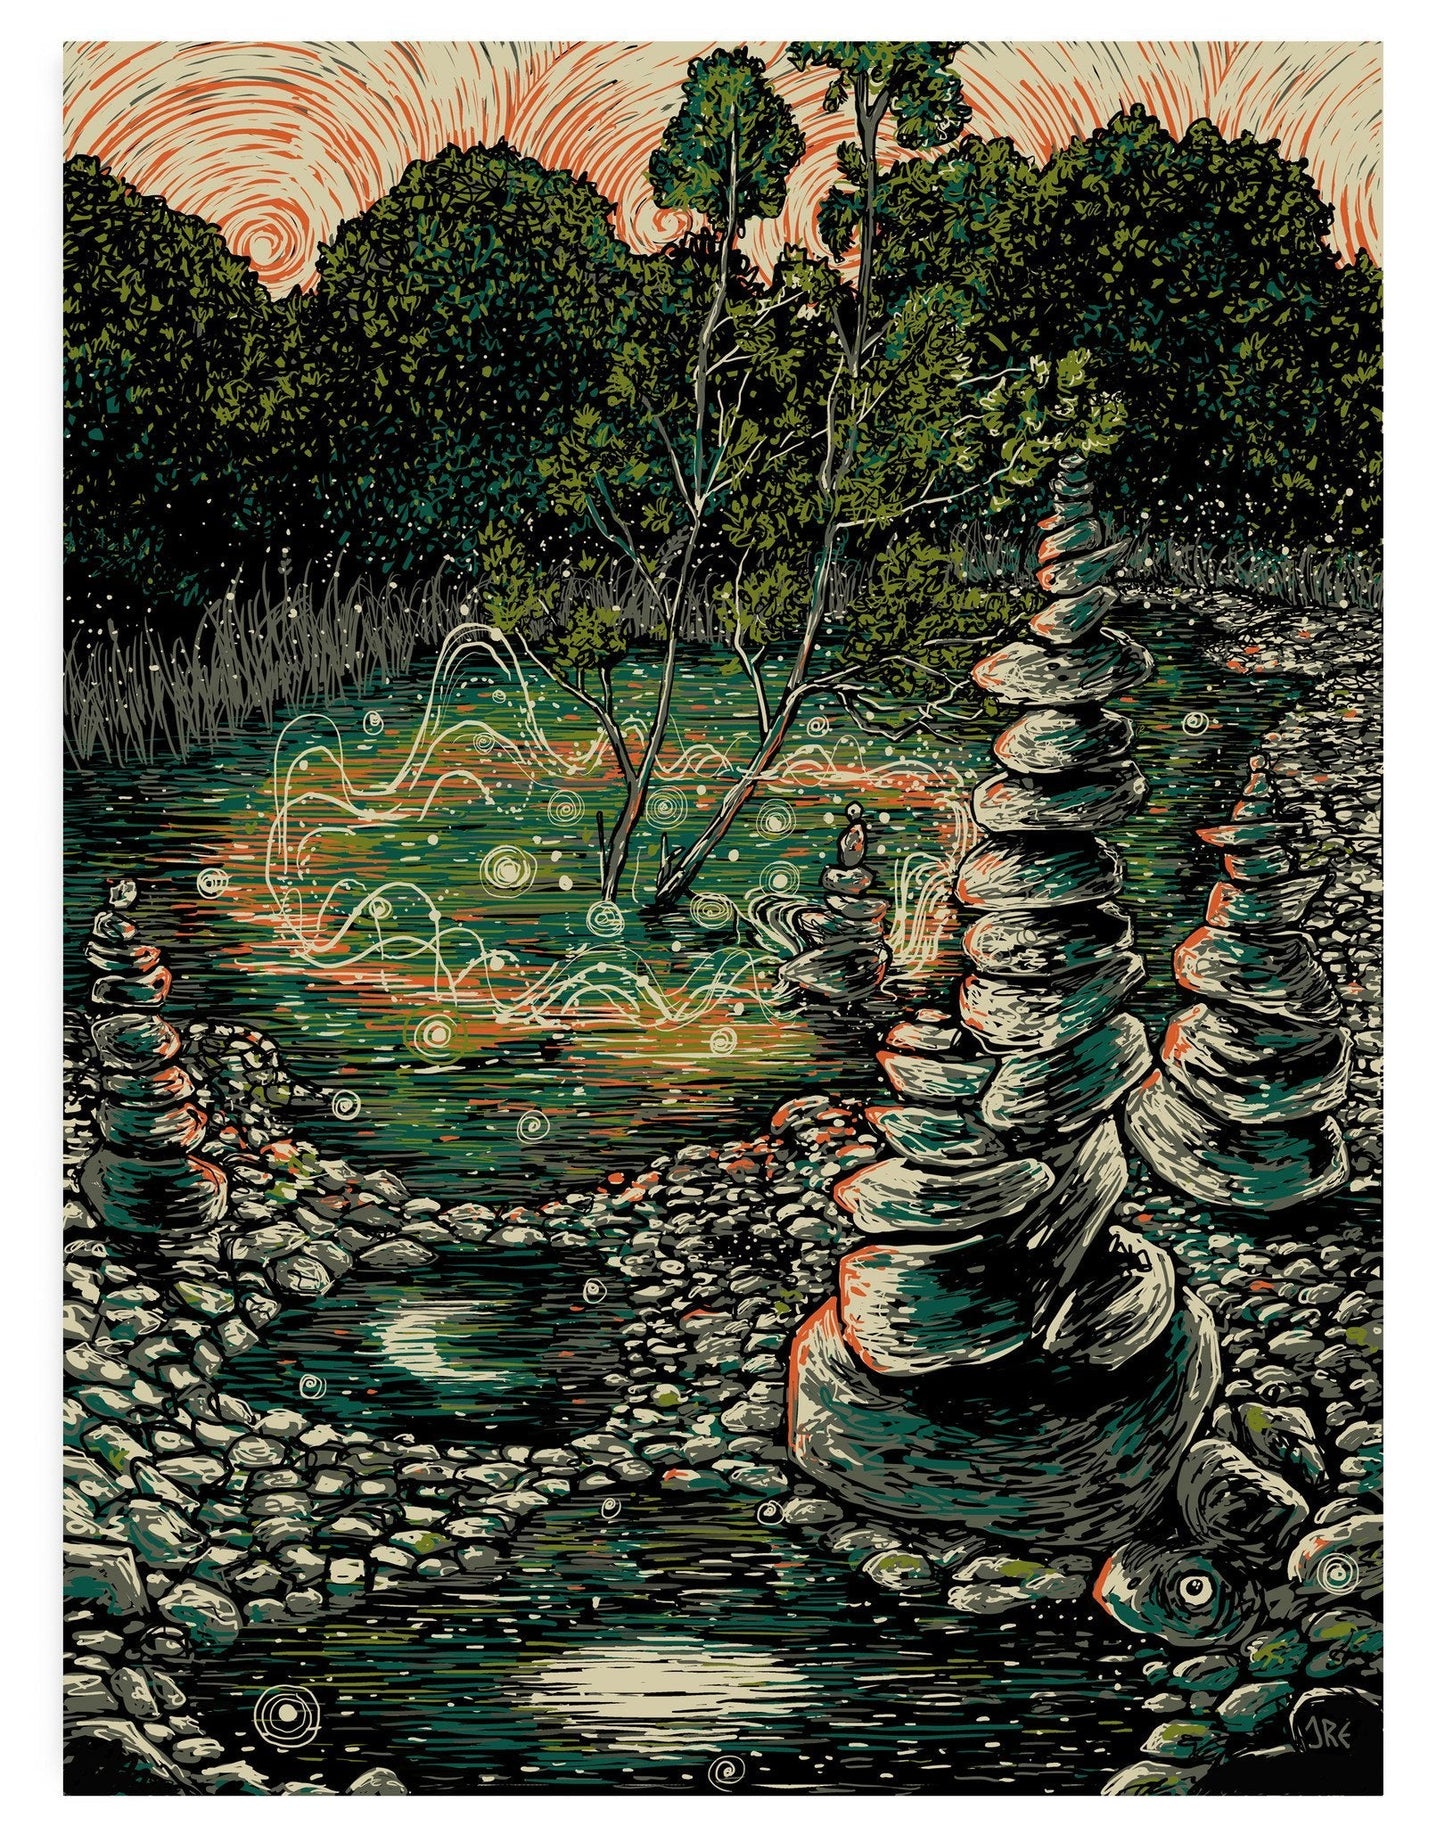 Spirit Stones (Limited Edition of 50) Print James R. Eads